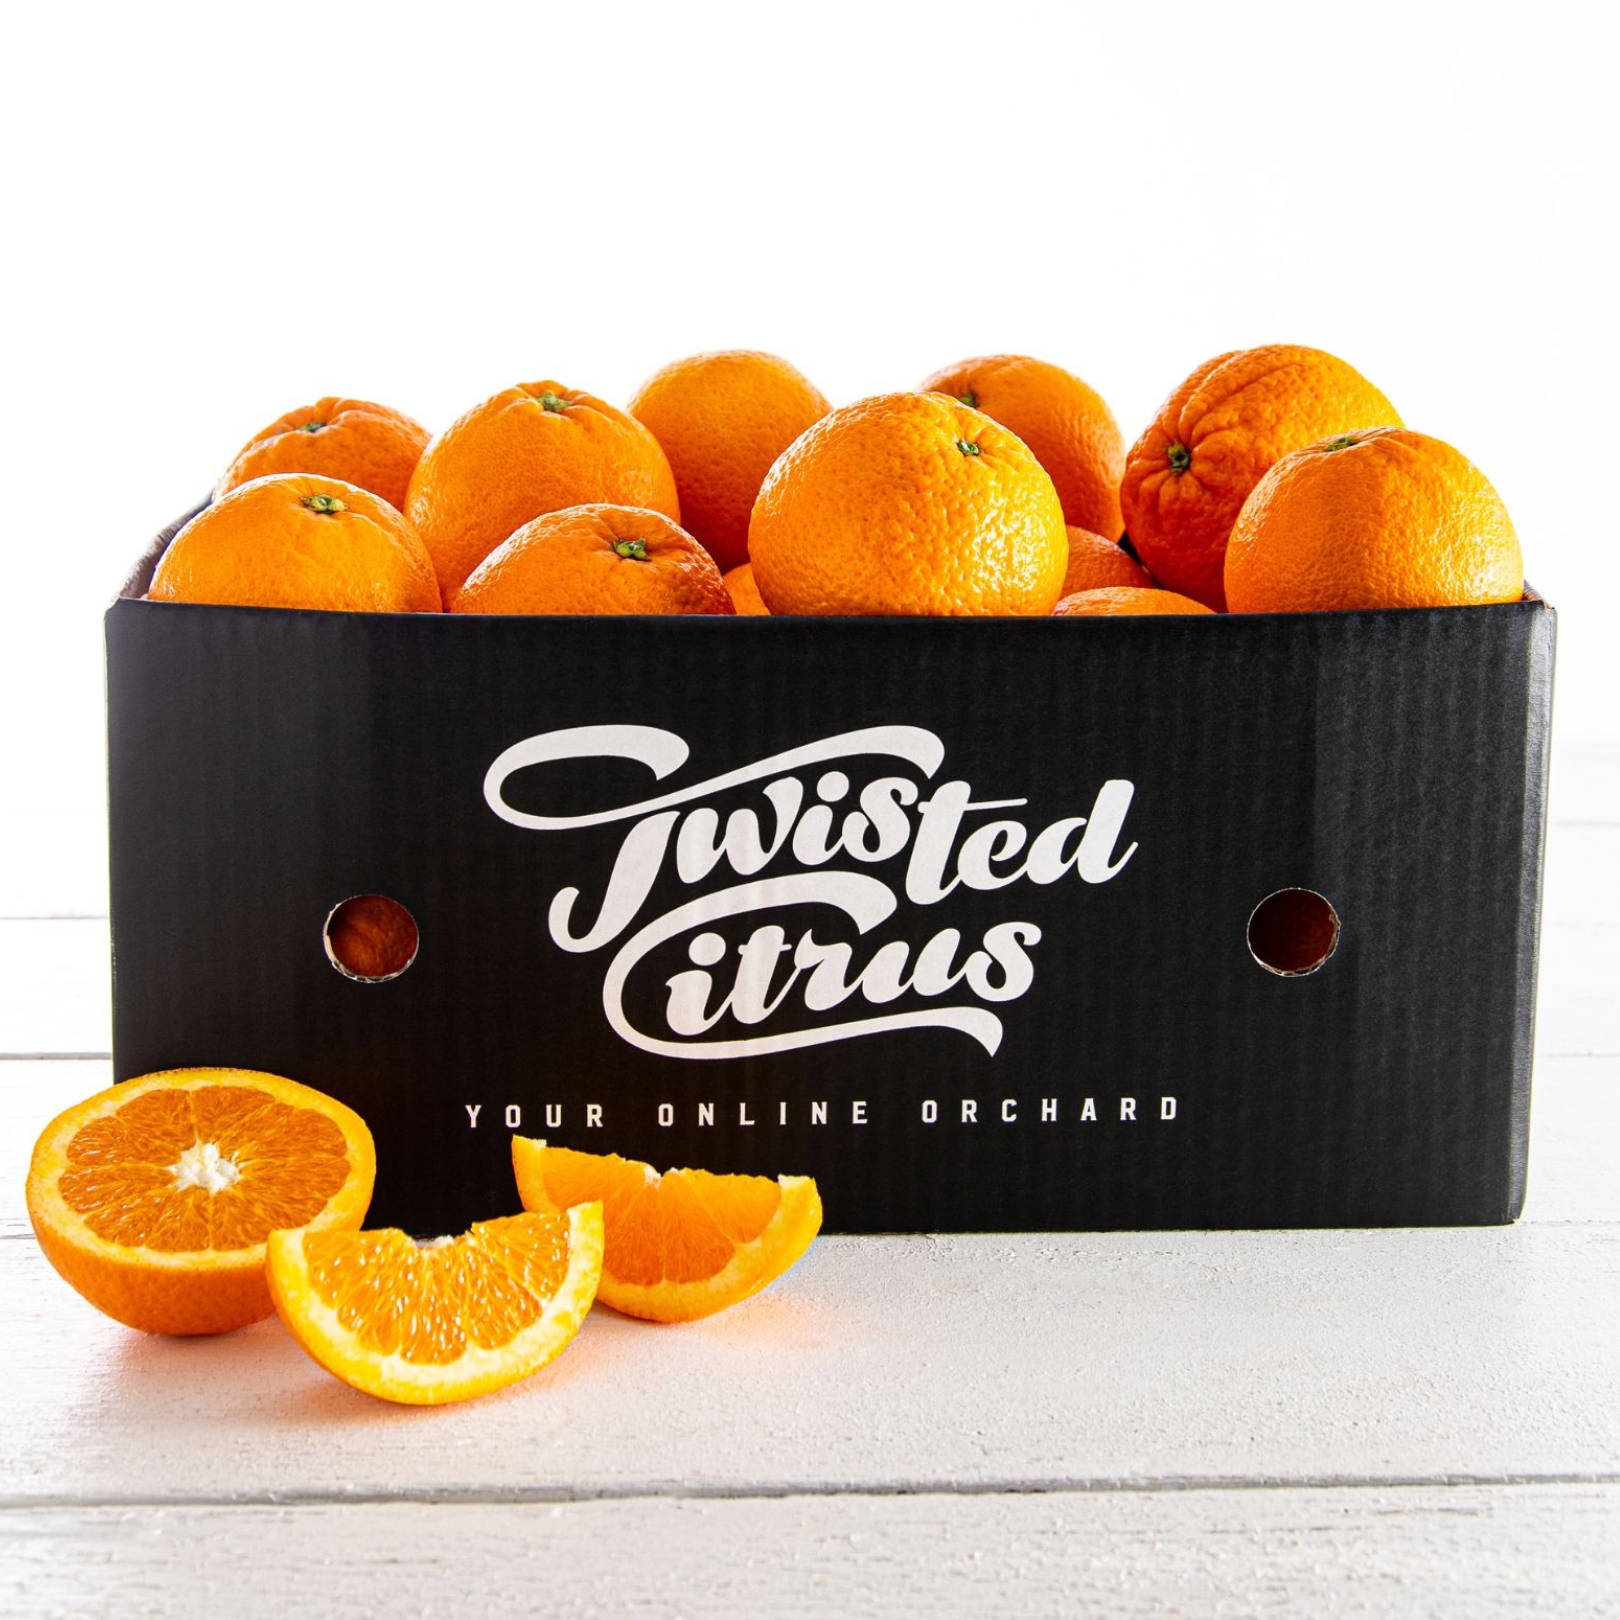 Oranges - Summer Kiss fruit box delivery nz